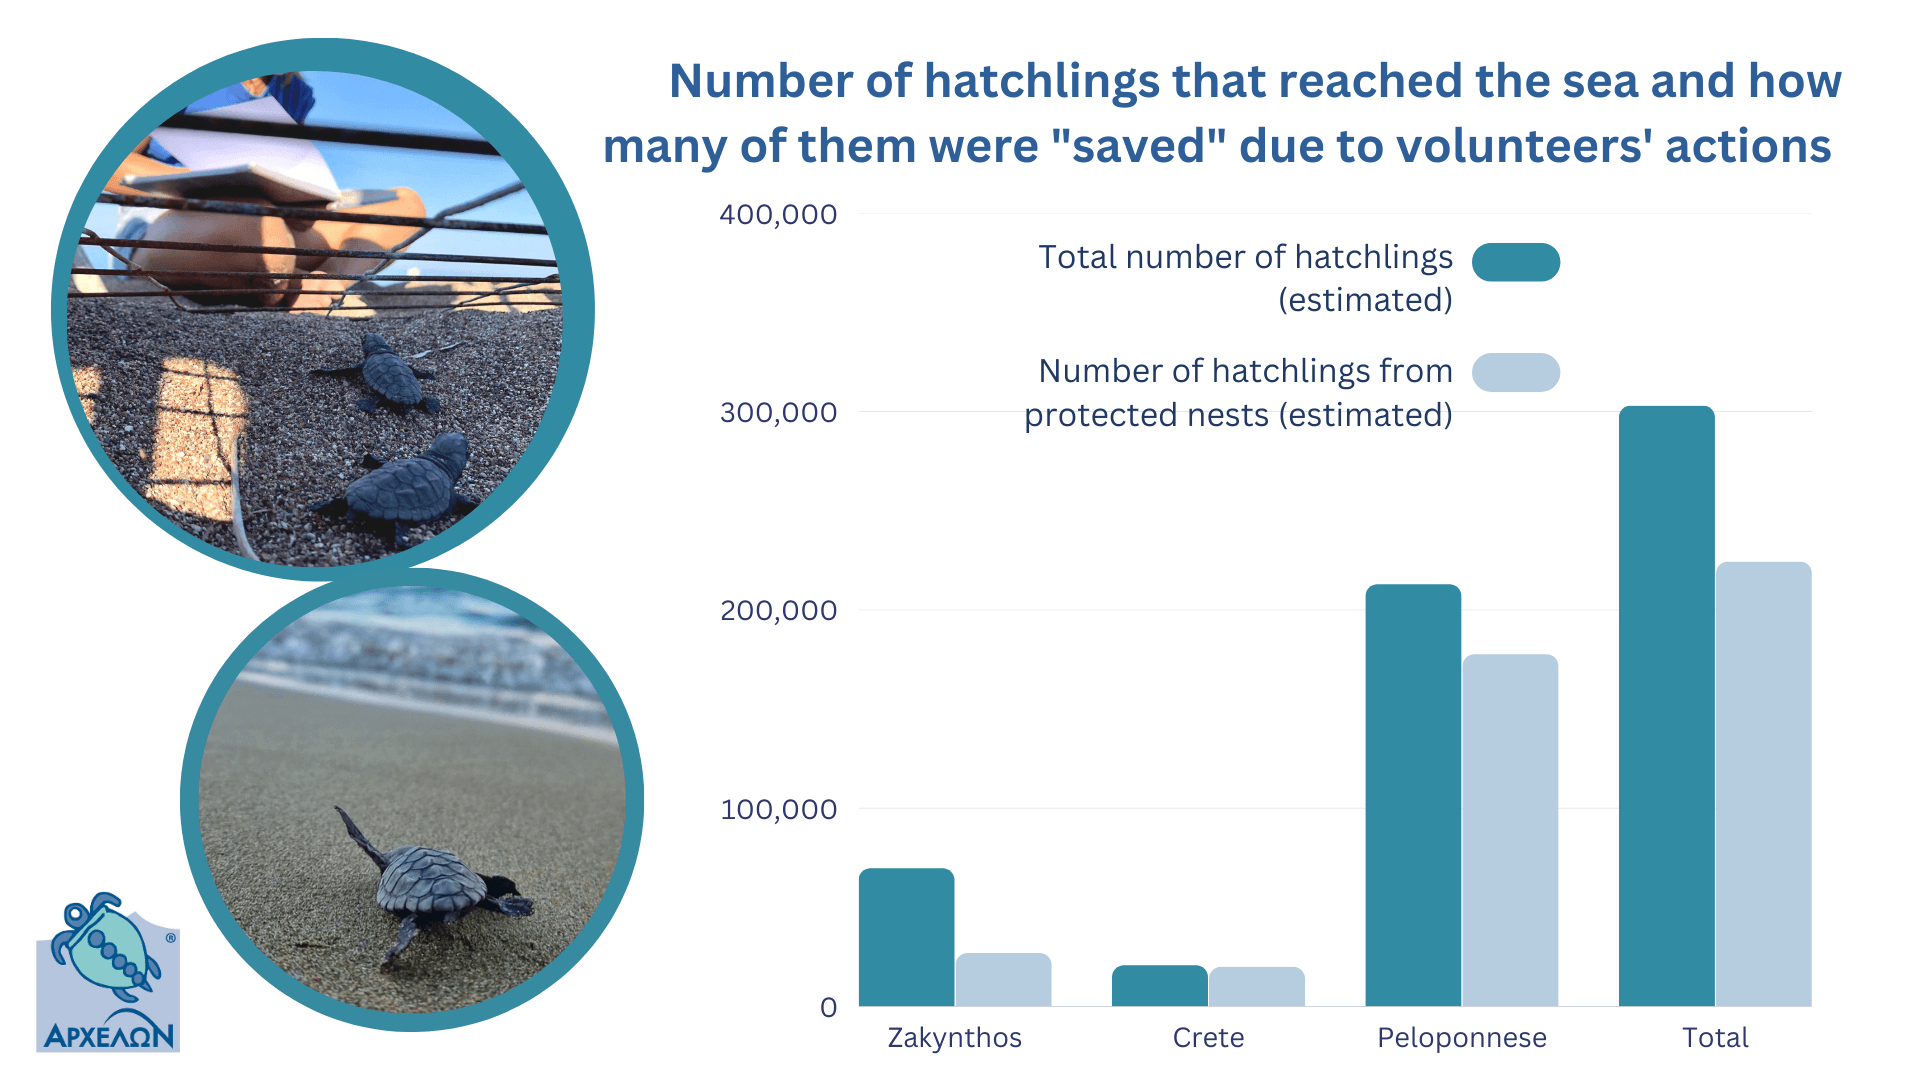 number-of-hatchlings-that-reached-the-sea-and-how-many-of-them-were-saved-due-to-volunteers-actions-2022.png